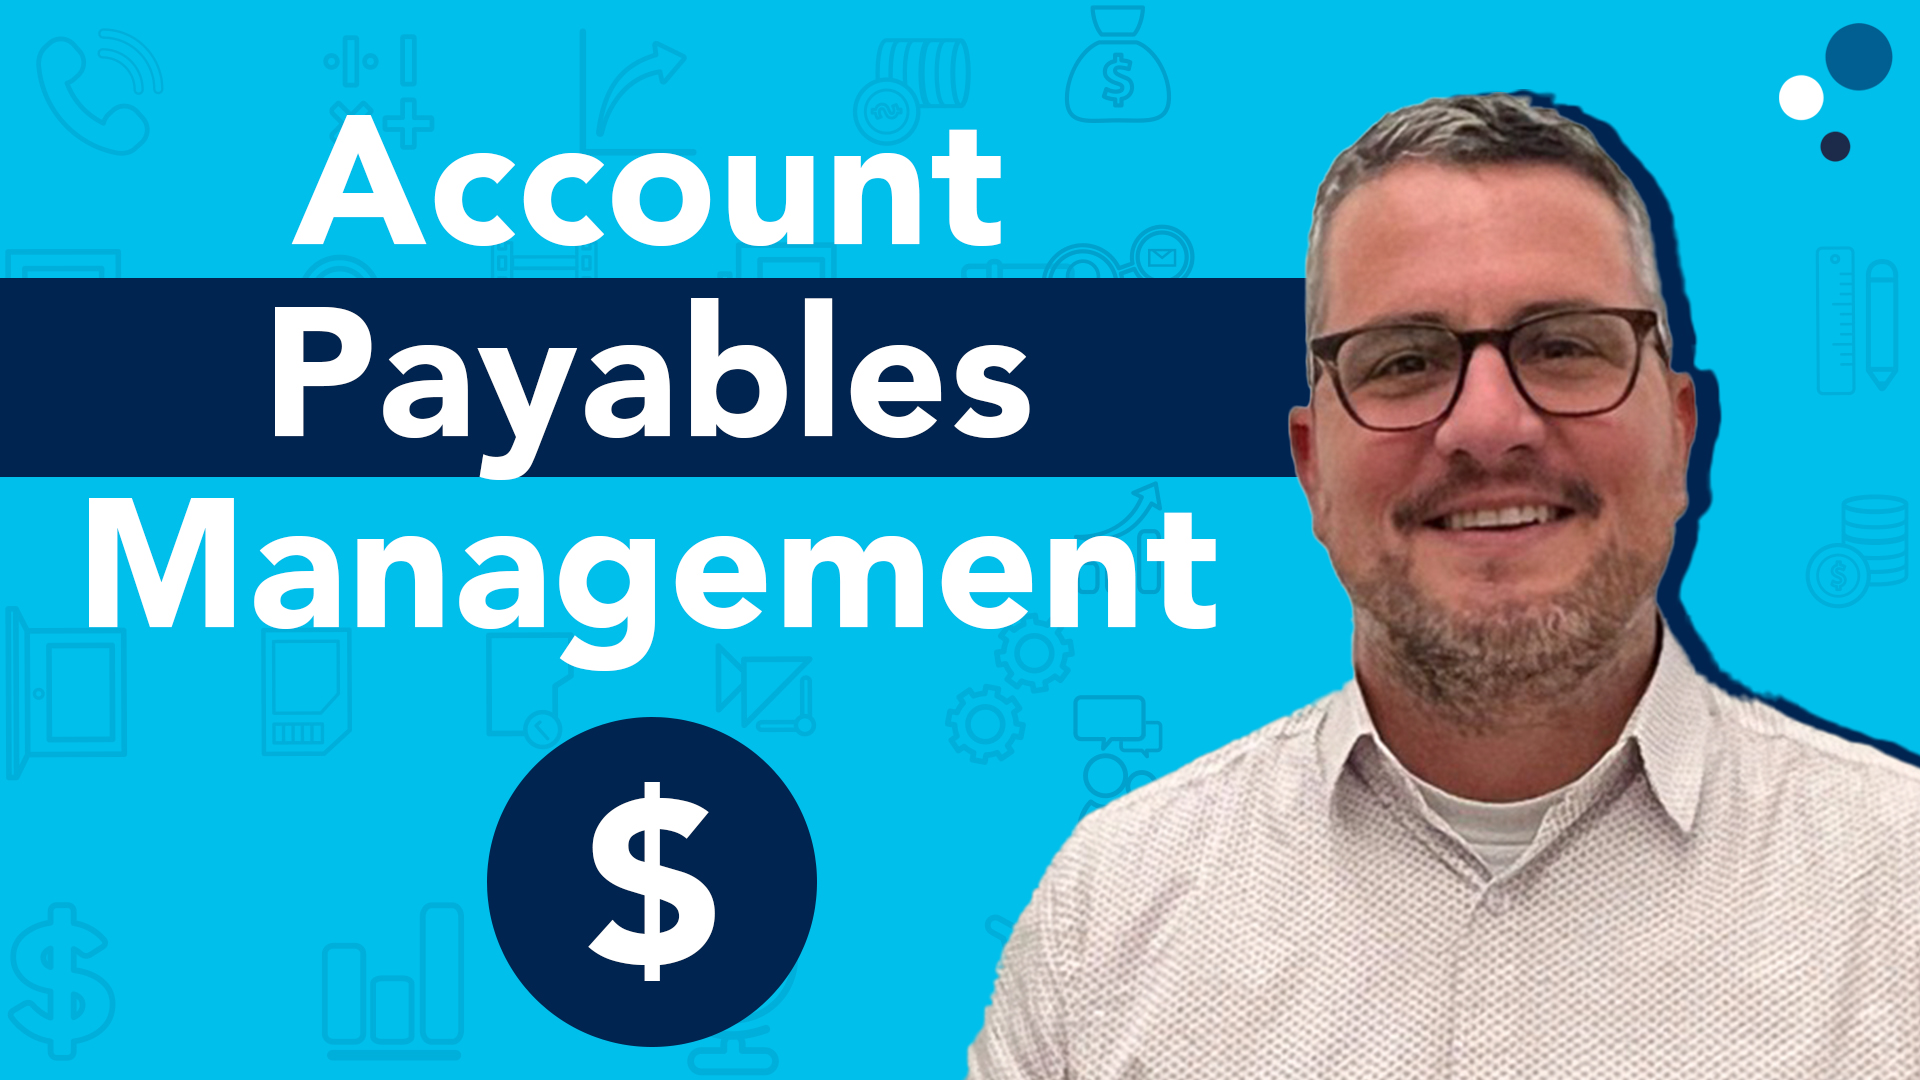 Accounts payables management with Fidelio ERP